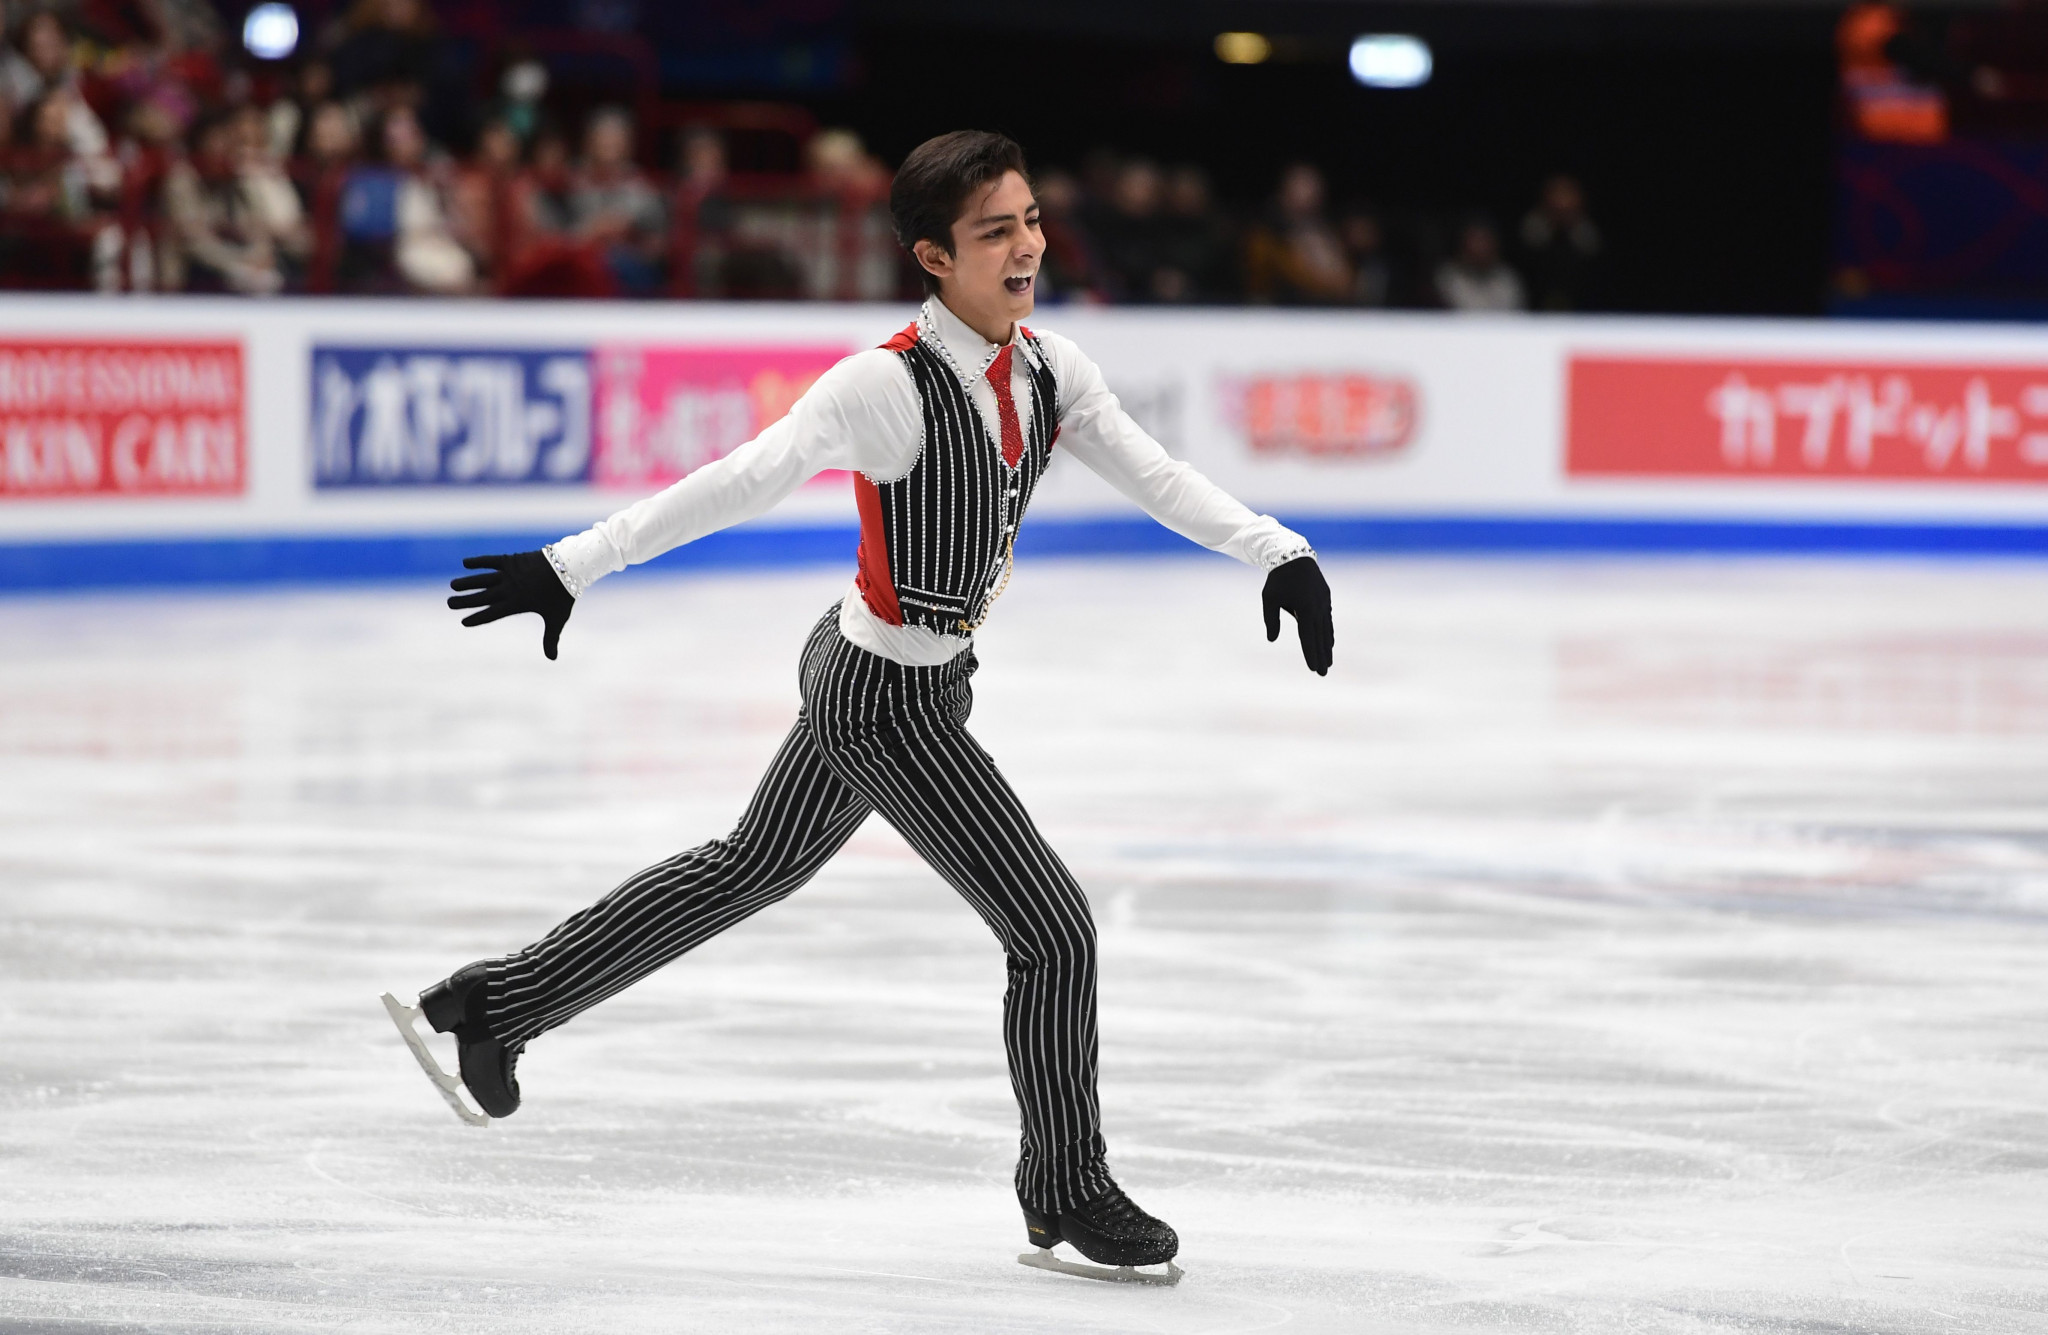 Mexican figure skater Carrillo returns to ice with Beijing 2022 qualification in his sights